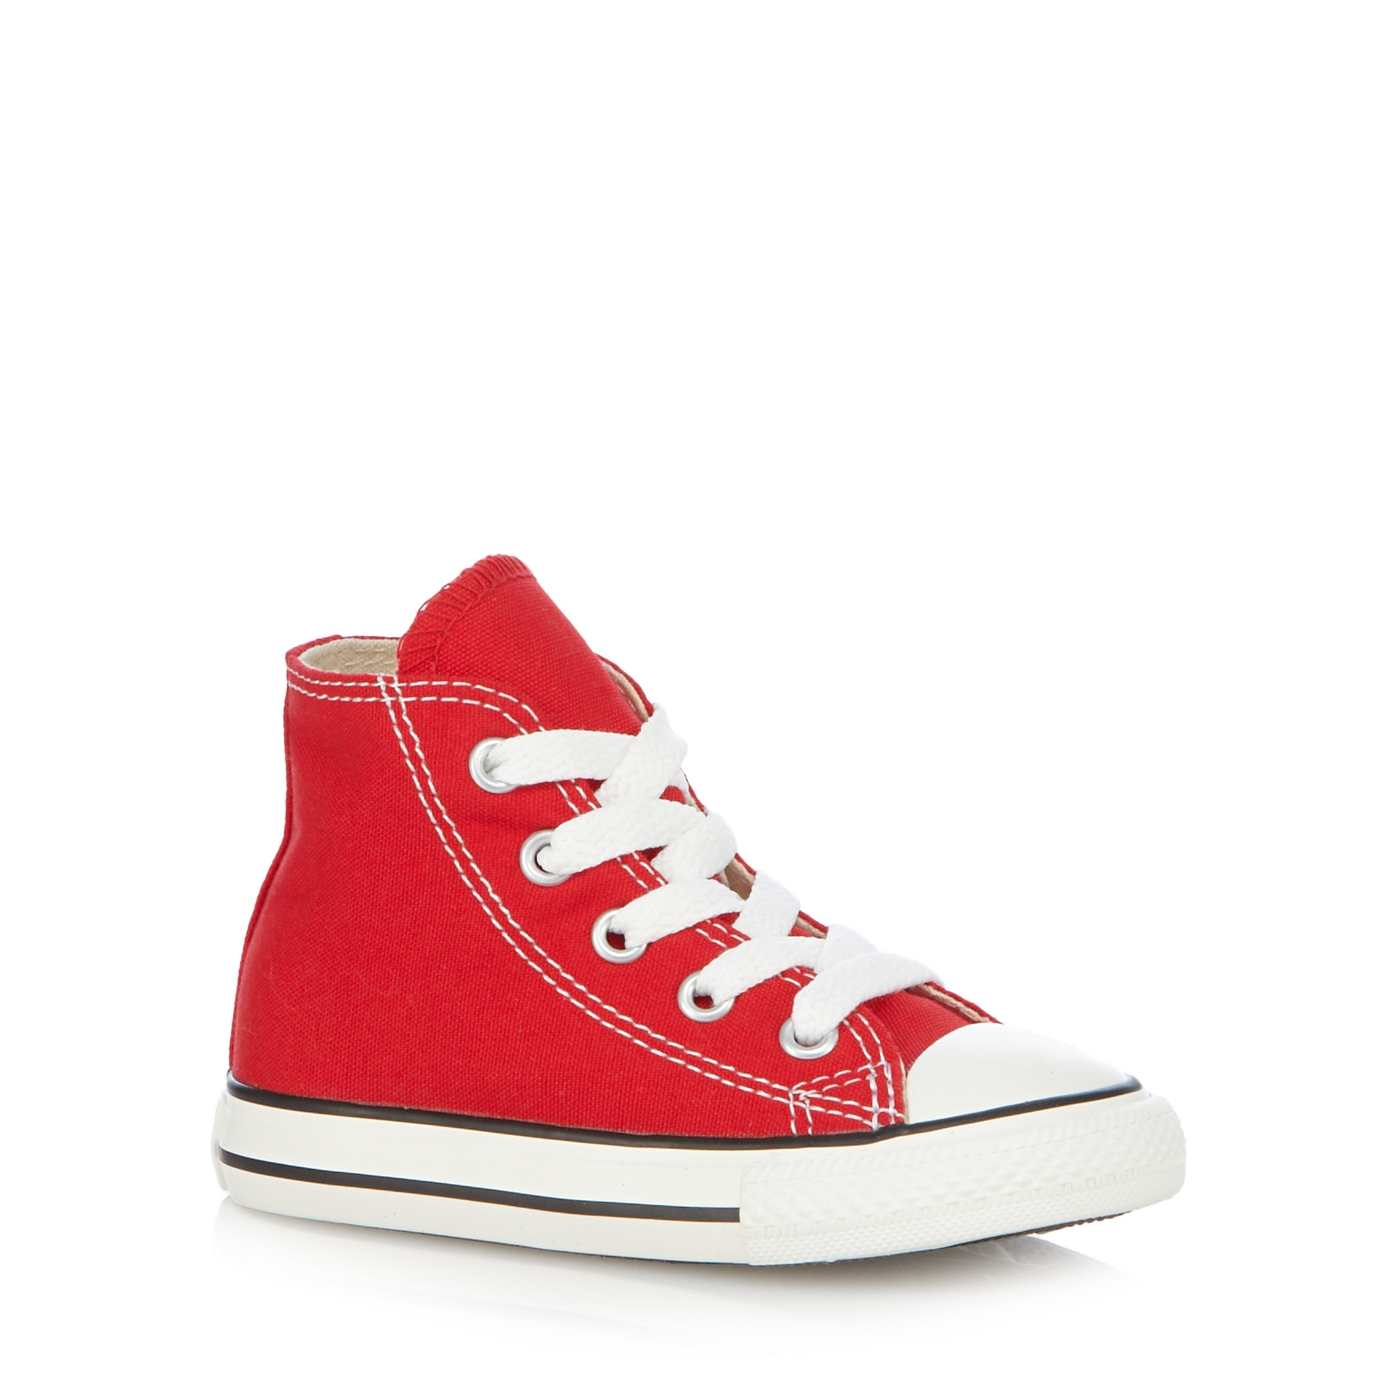 Converse Childrens red All Star hi top trainers